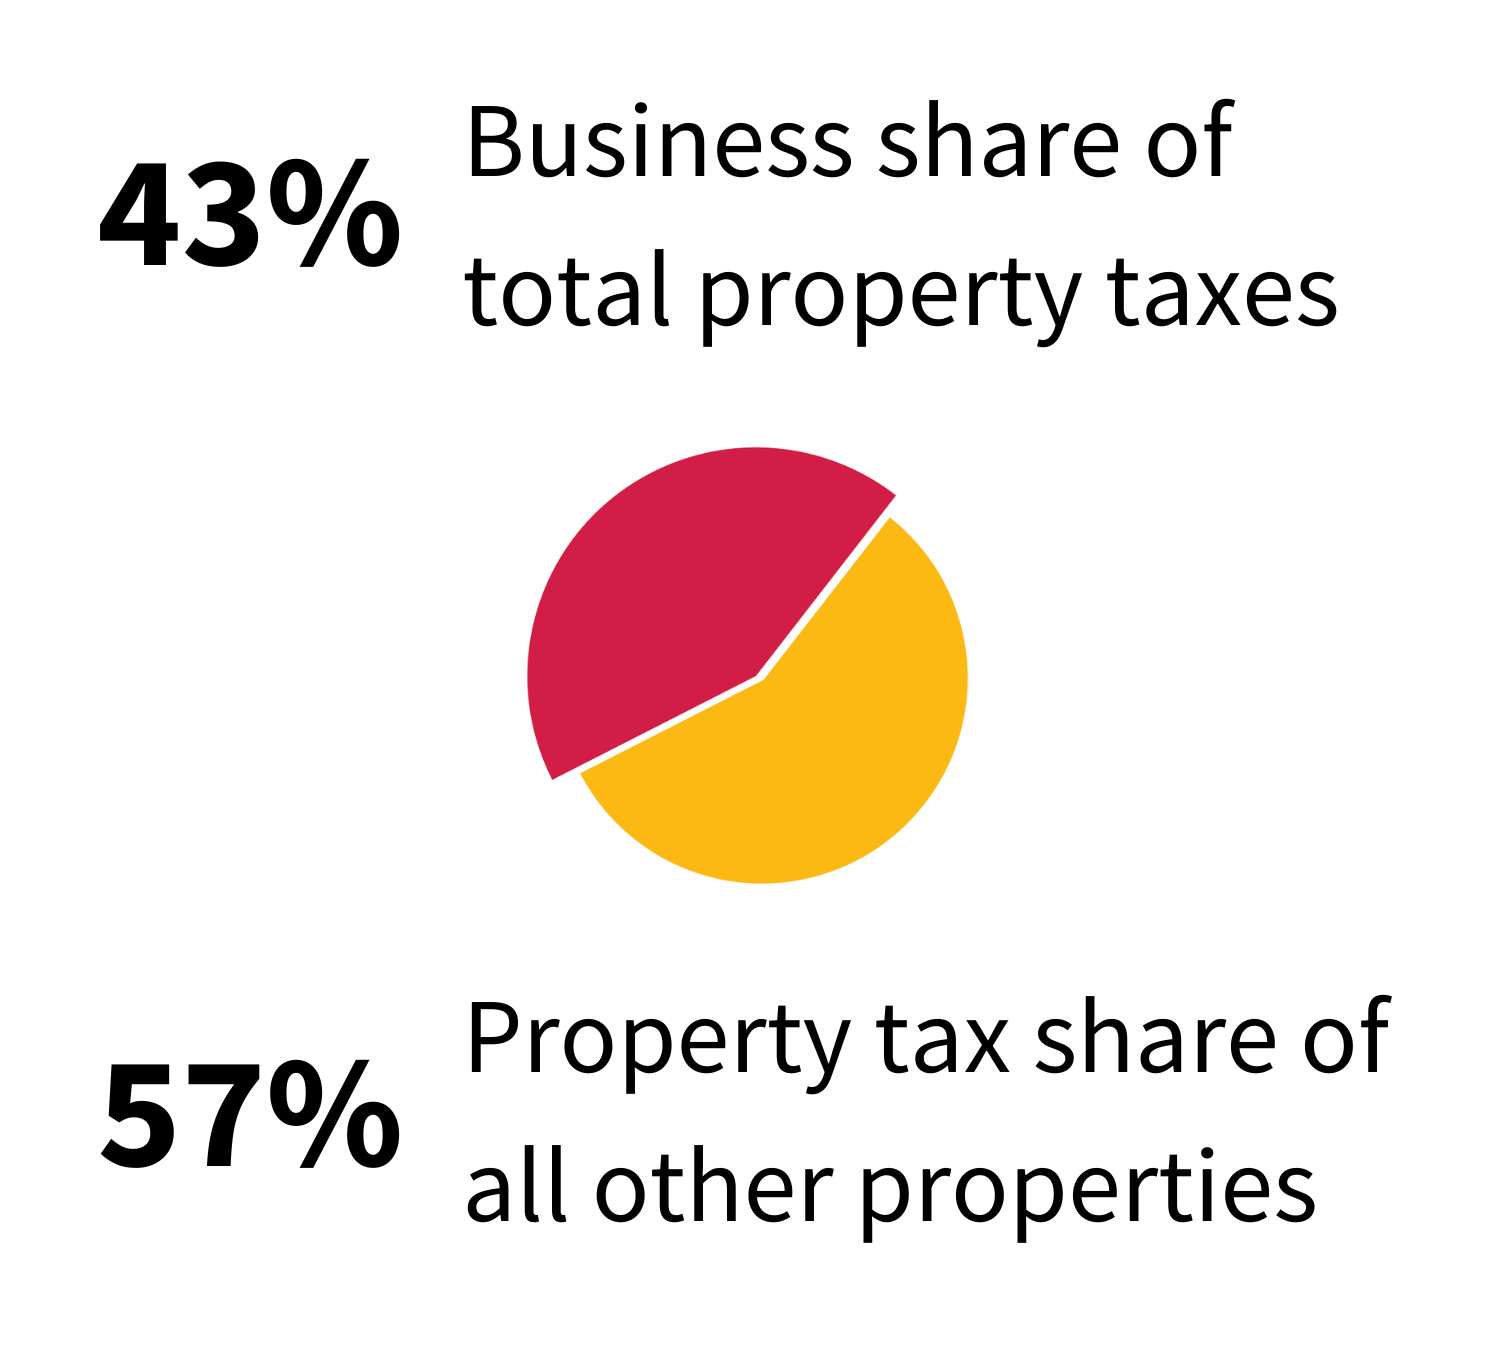 Image of a pie chart showing 1. 43% for Business share of total property taxes 2. 57% for Property tax share of all other properties